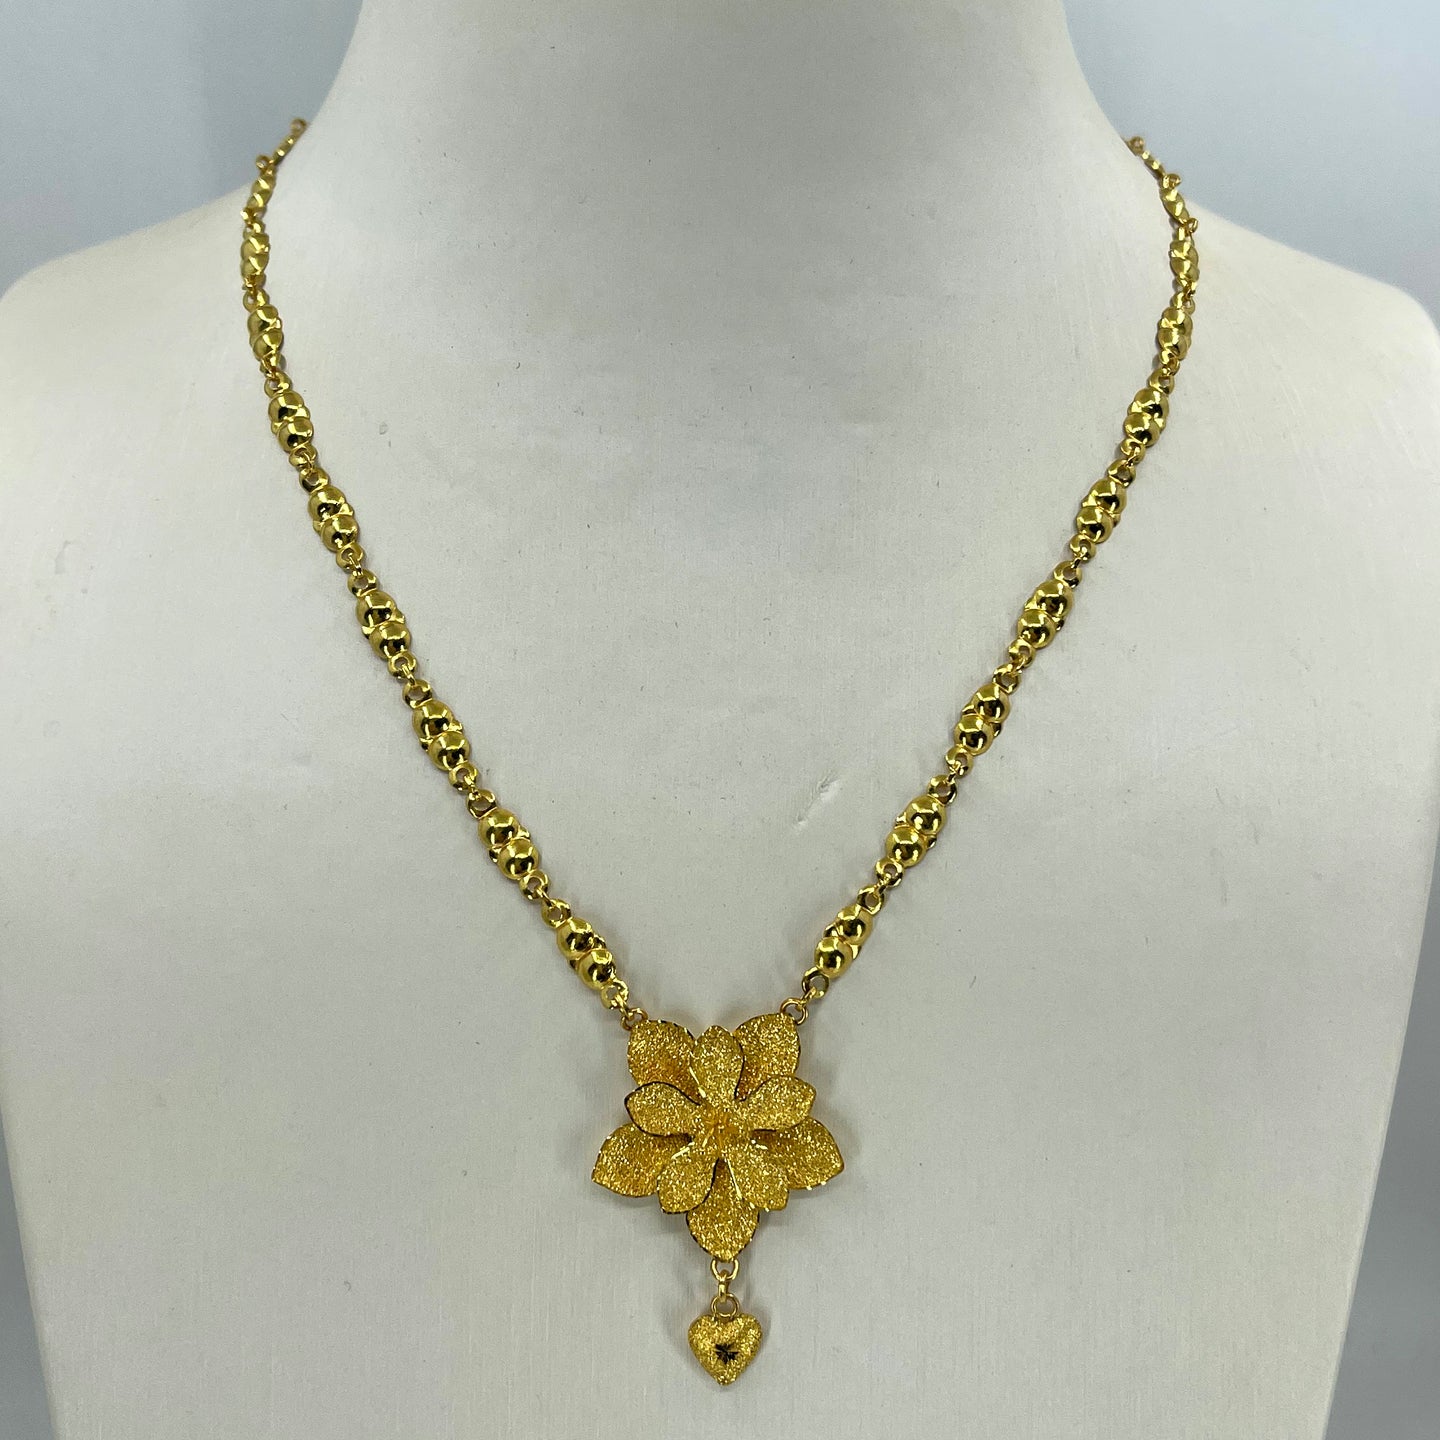 24K Solid Yellow Gold Wedding Single Flower Chain Necklace 8.5 Grams 16.5